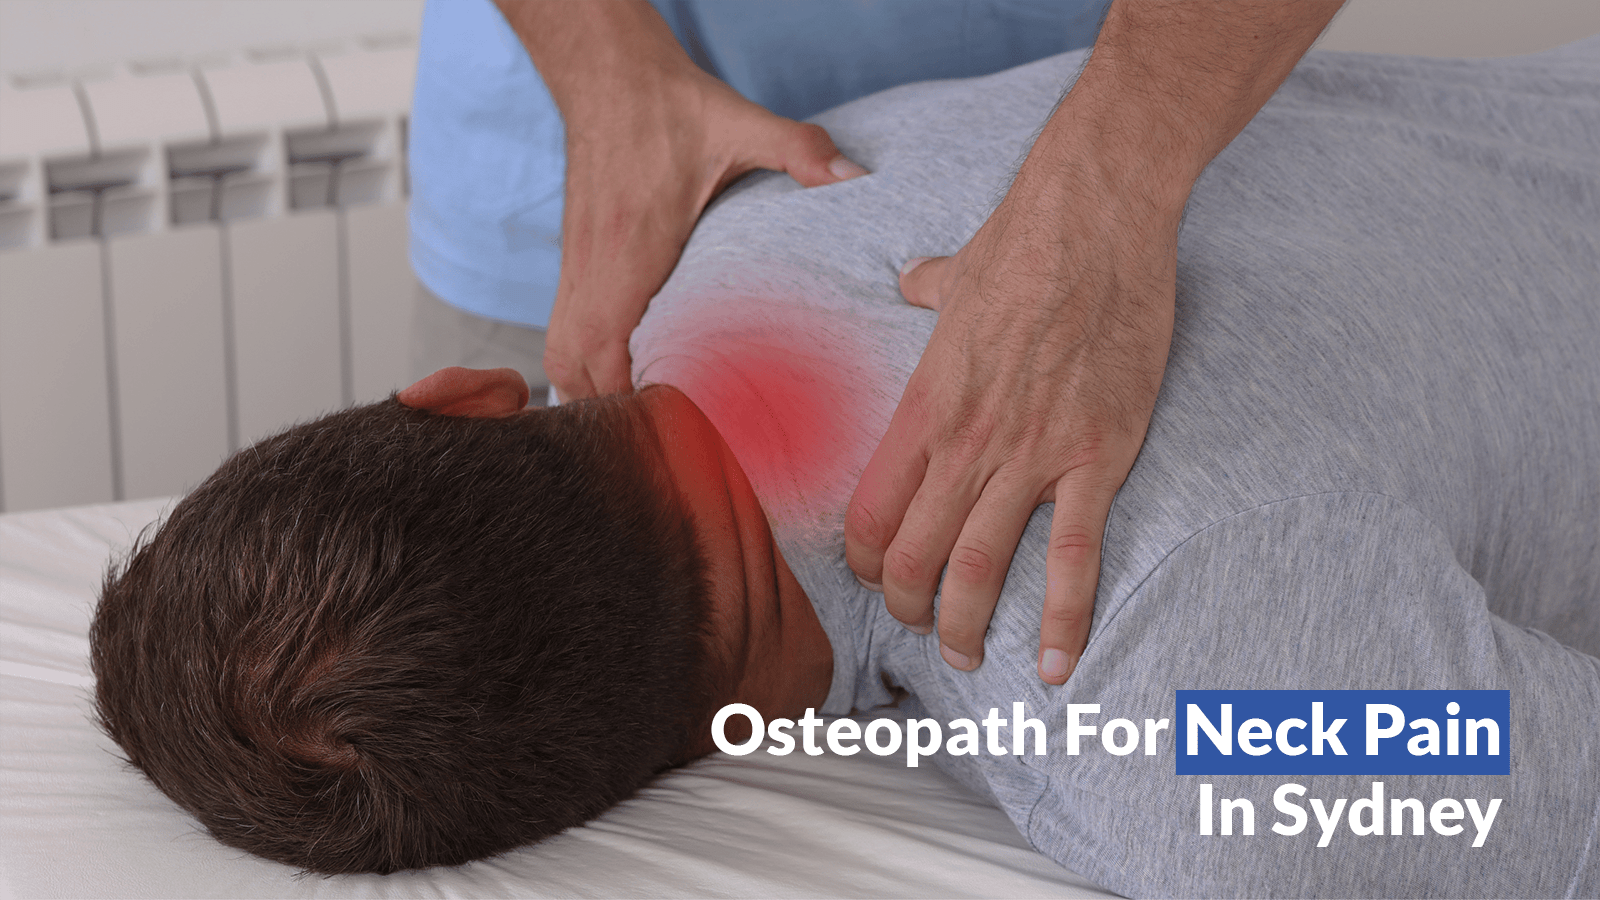 Osteopath For Neck Pain In Sydney min